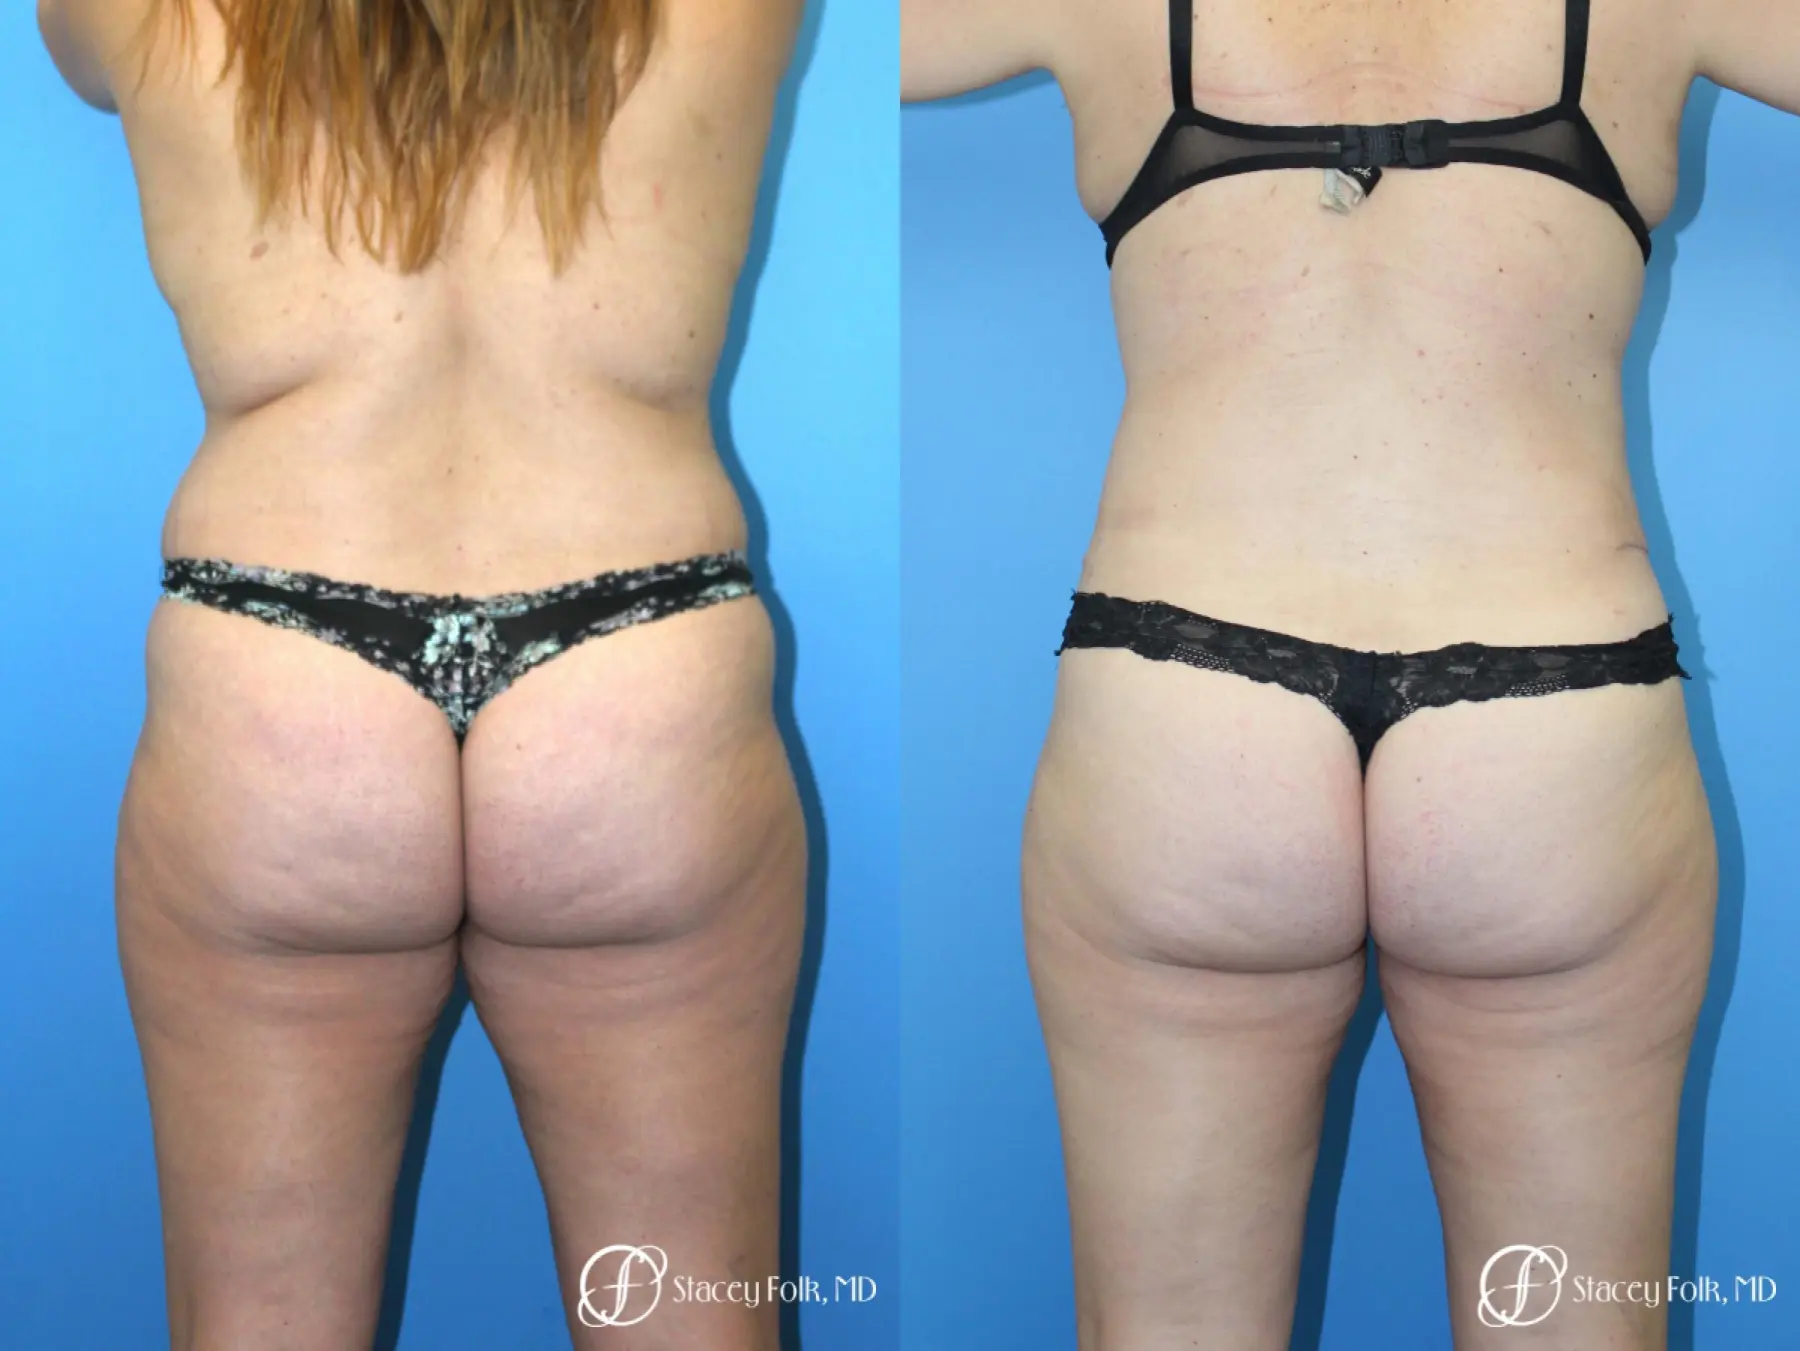 Tummy Tuck (Abdominoplasty) and Liposuction - Before and After 2